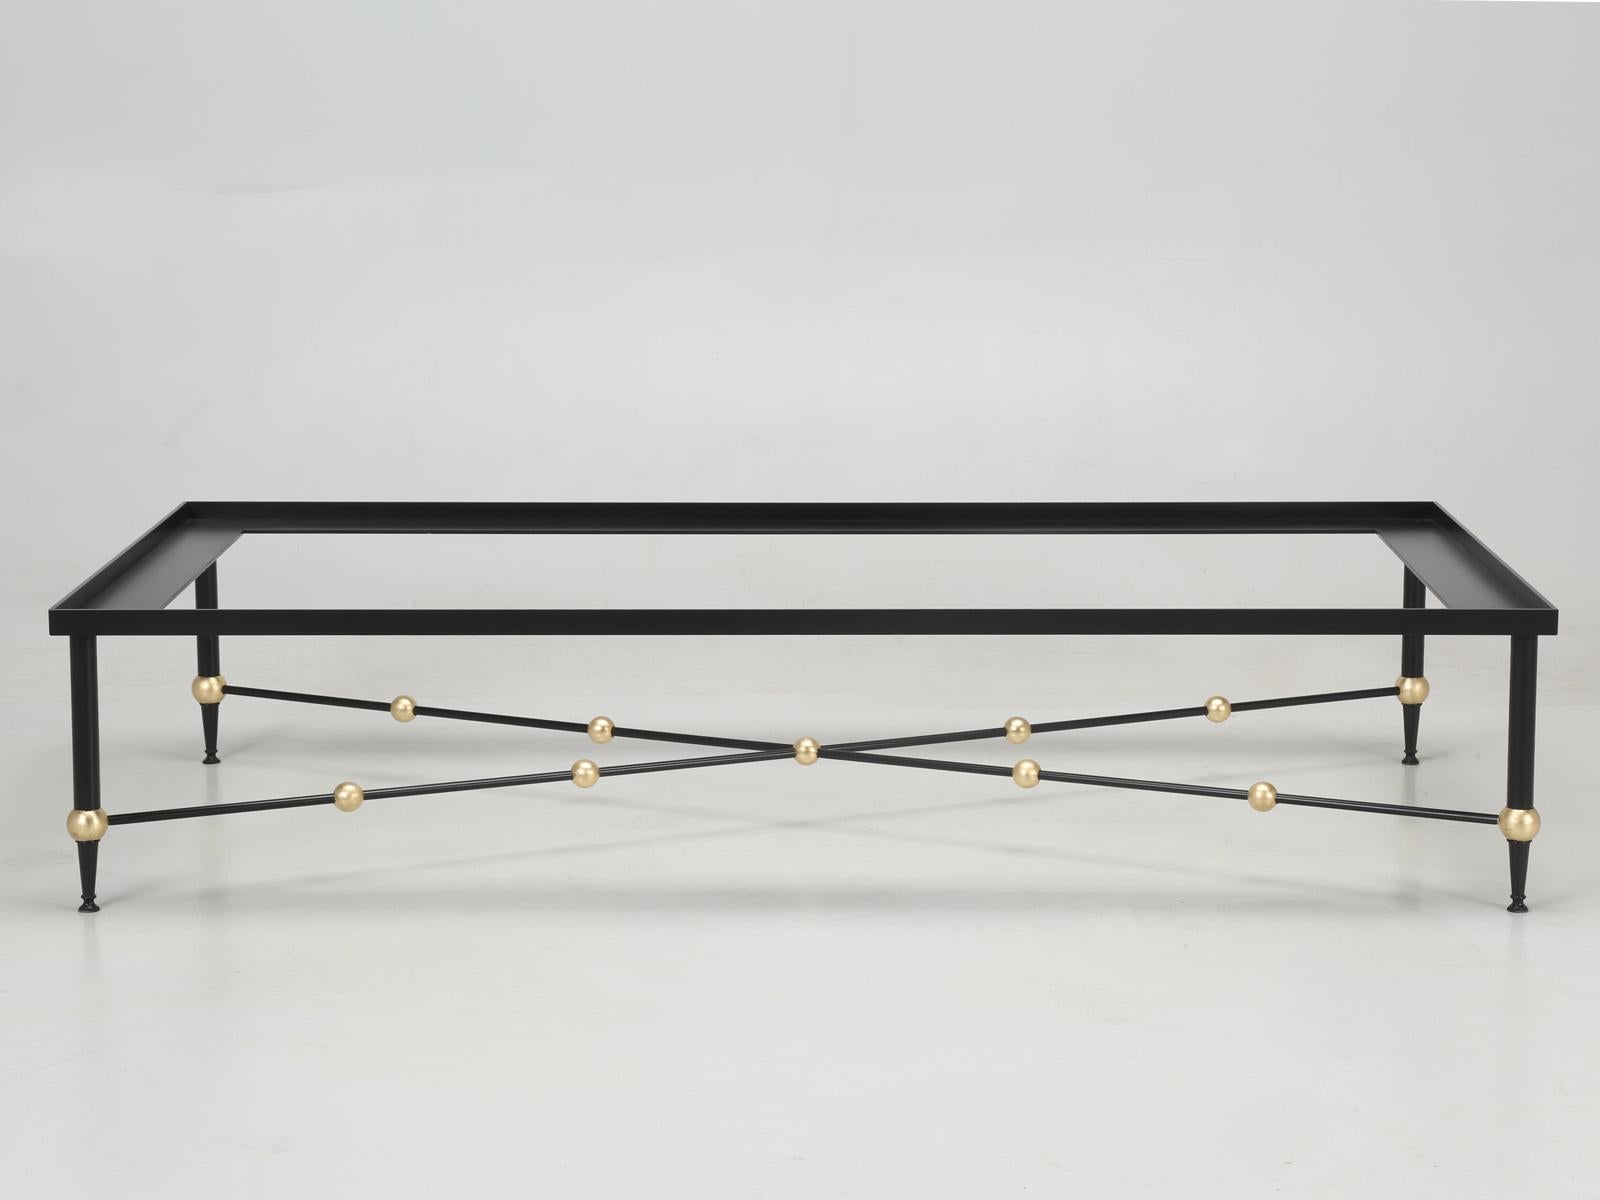 Custom steel and brass Mid-Century modern coffee table made to order by Old Plank and available in virtually any dimension or finish. Just submit your specifications through the 1stdibs message center for a quotation.